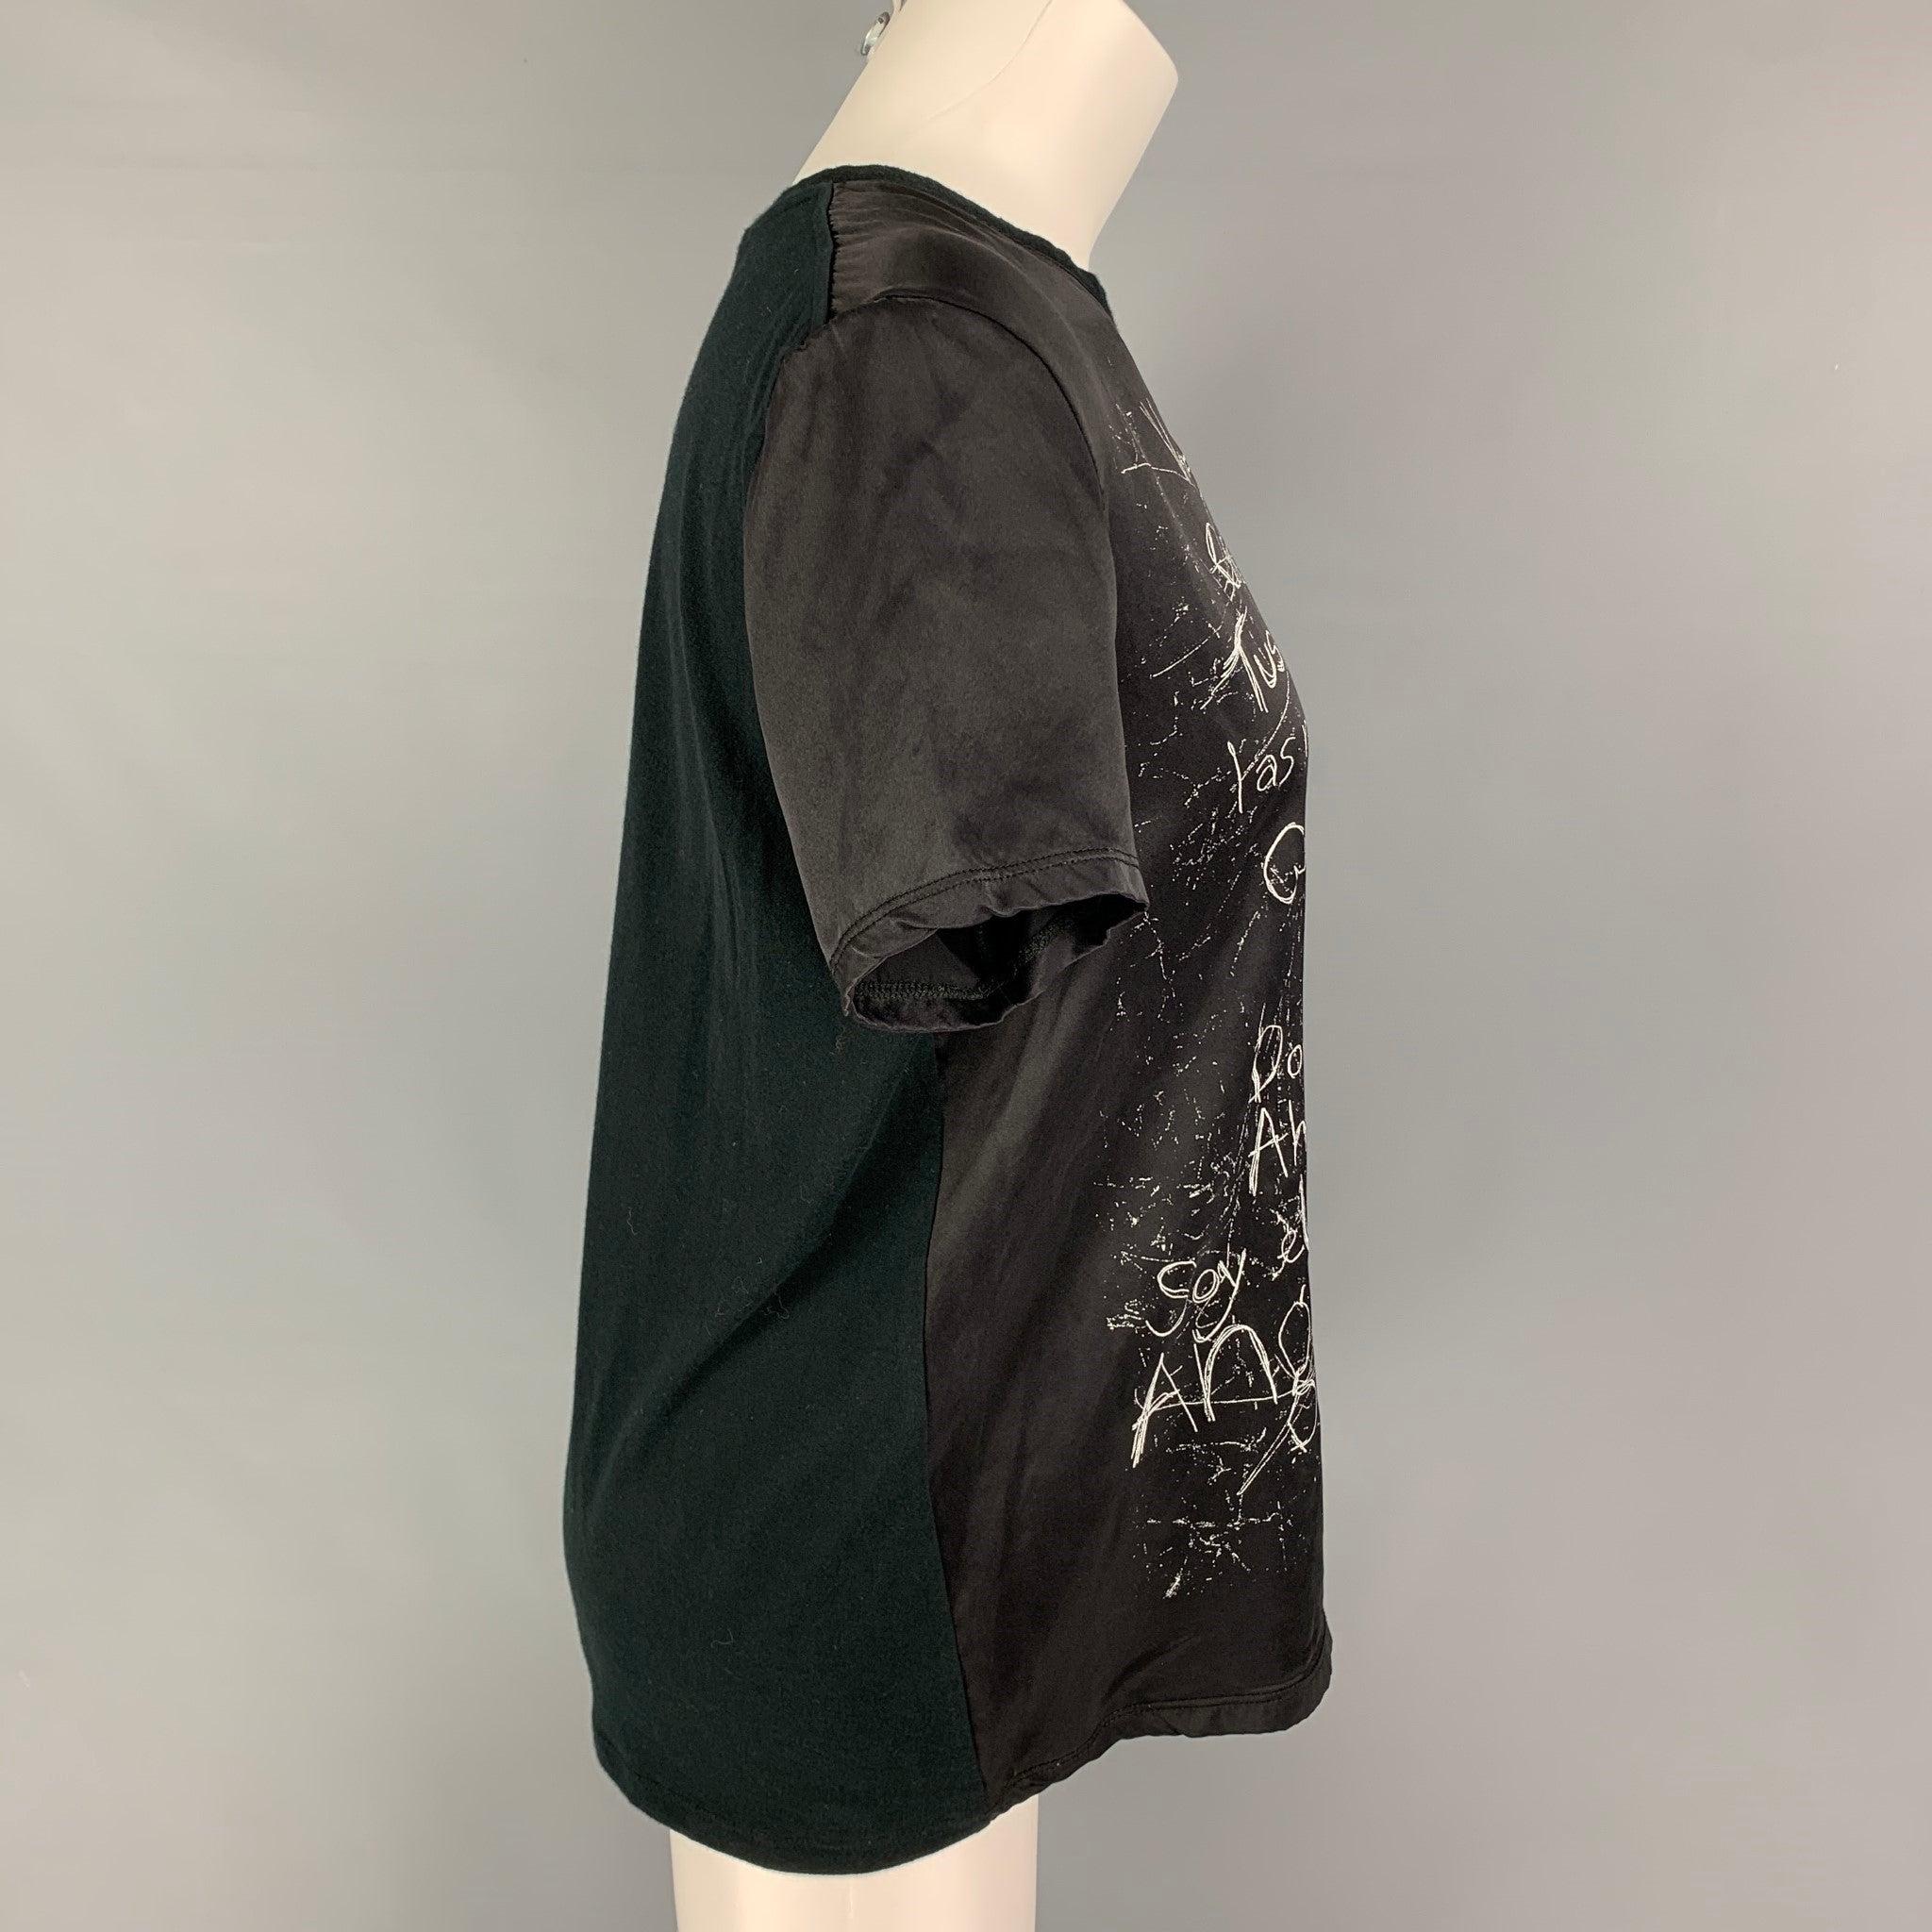 GIVENCHY t-shirt comes in a black silk featuring a front text design and a crew-neck.
Very Good
Pre-Owned Condition. 

Marked:   M
  

Measurements: 
 
Shoulder: 17 inches  Bust:
38 inches  Sleeve: 8 inches  Length: 24 inches 
  
  
 
Reference: